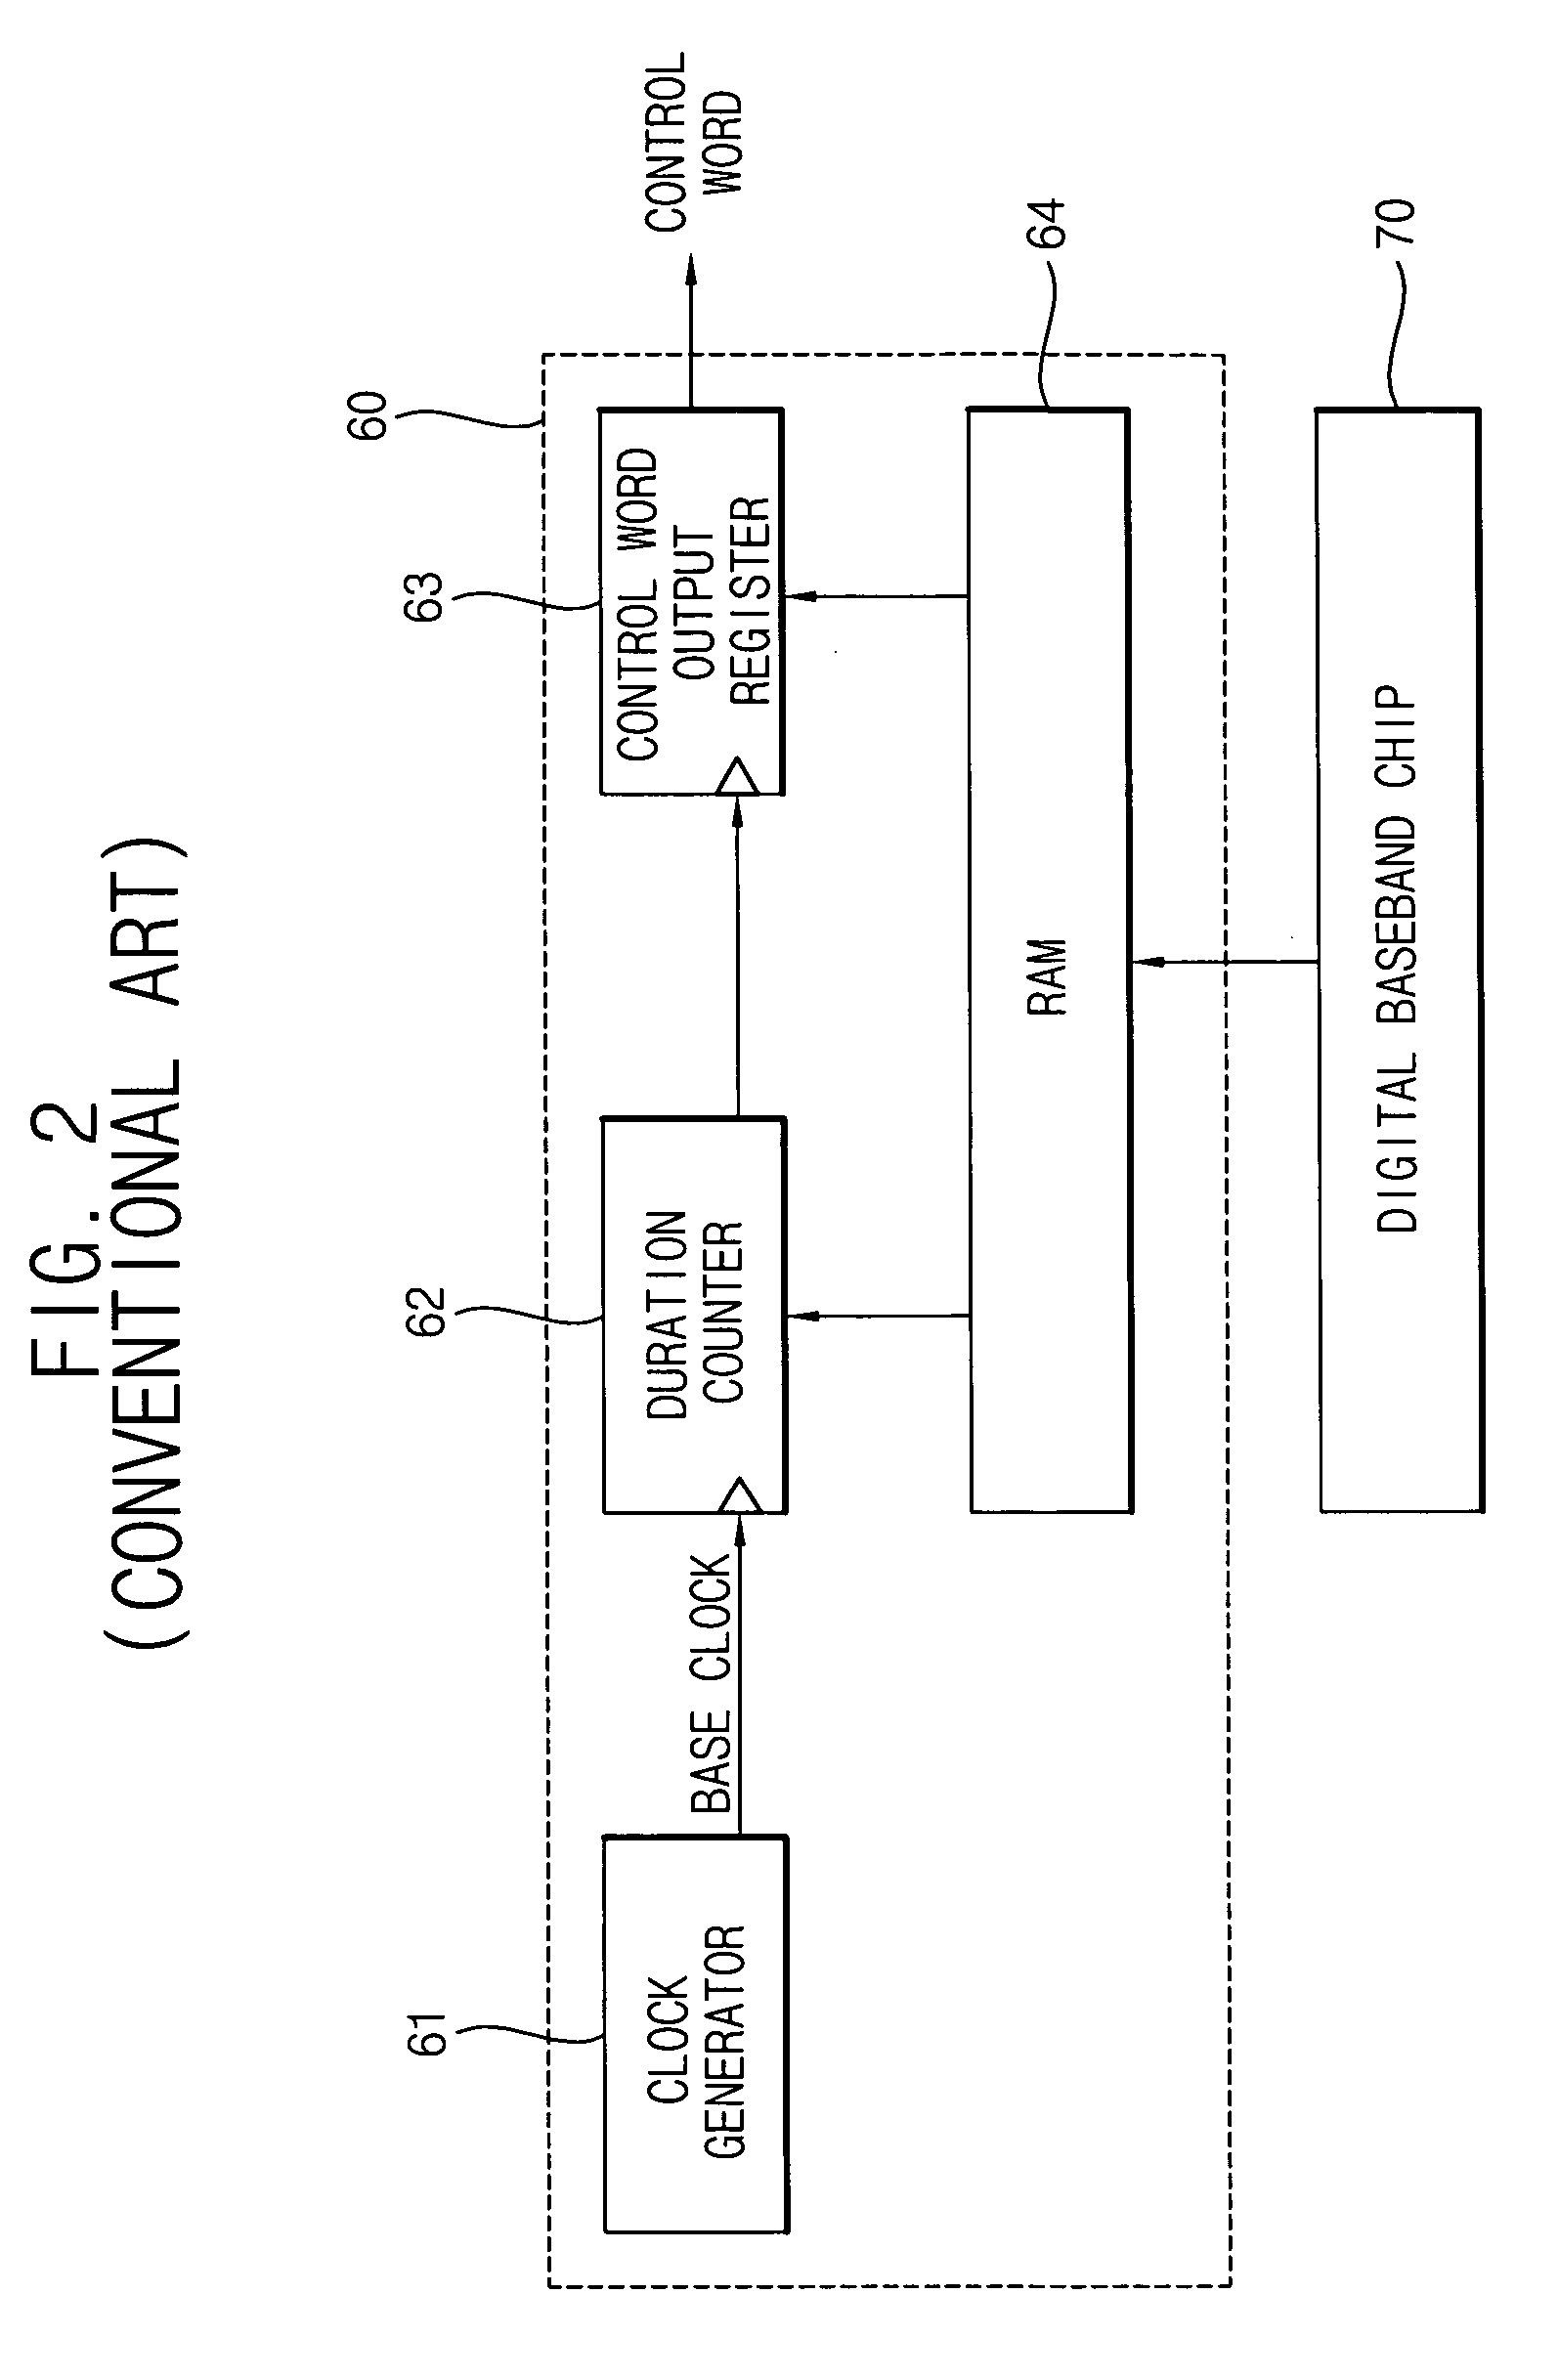 Timing generator and methods thereof